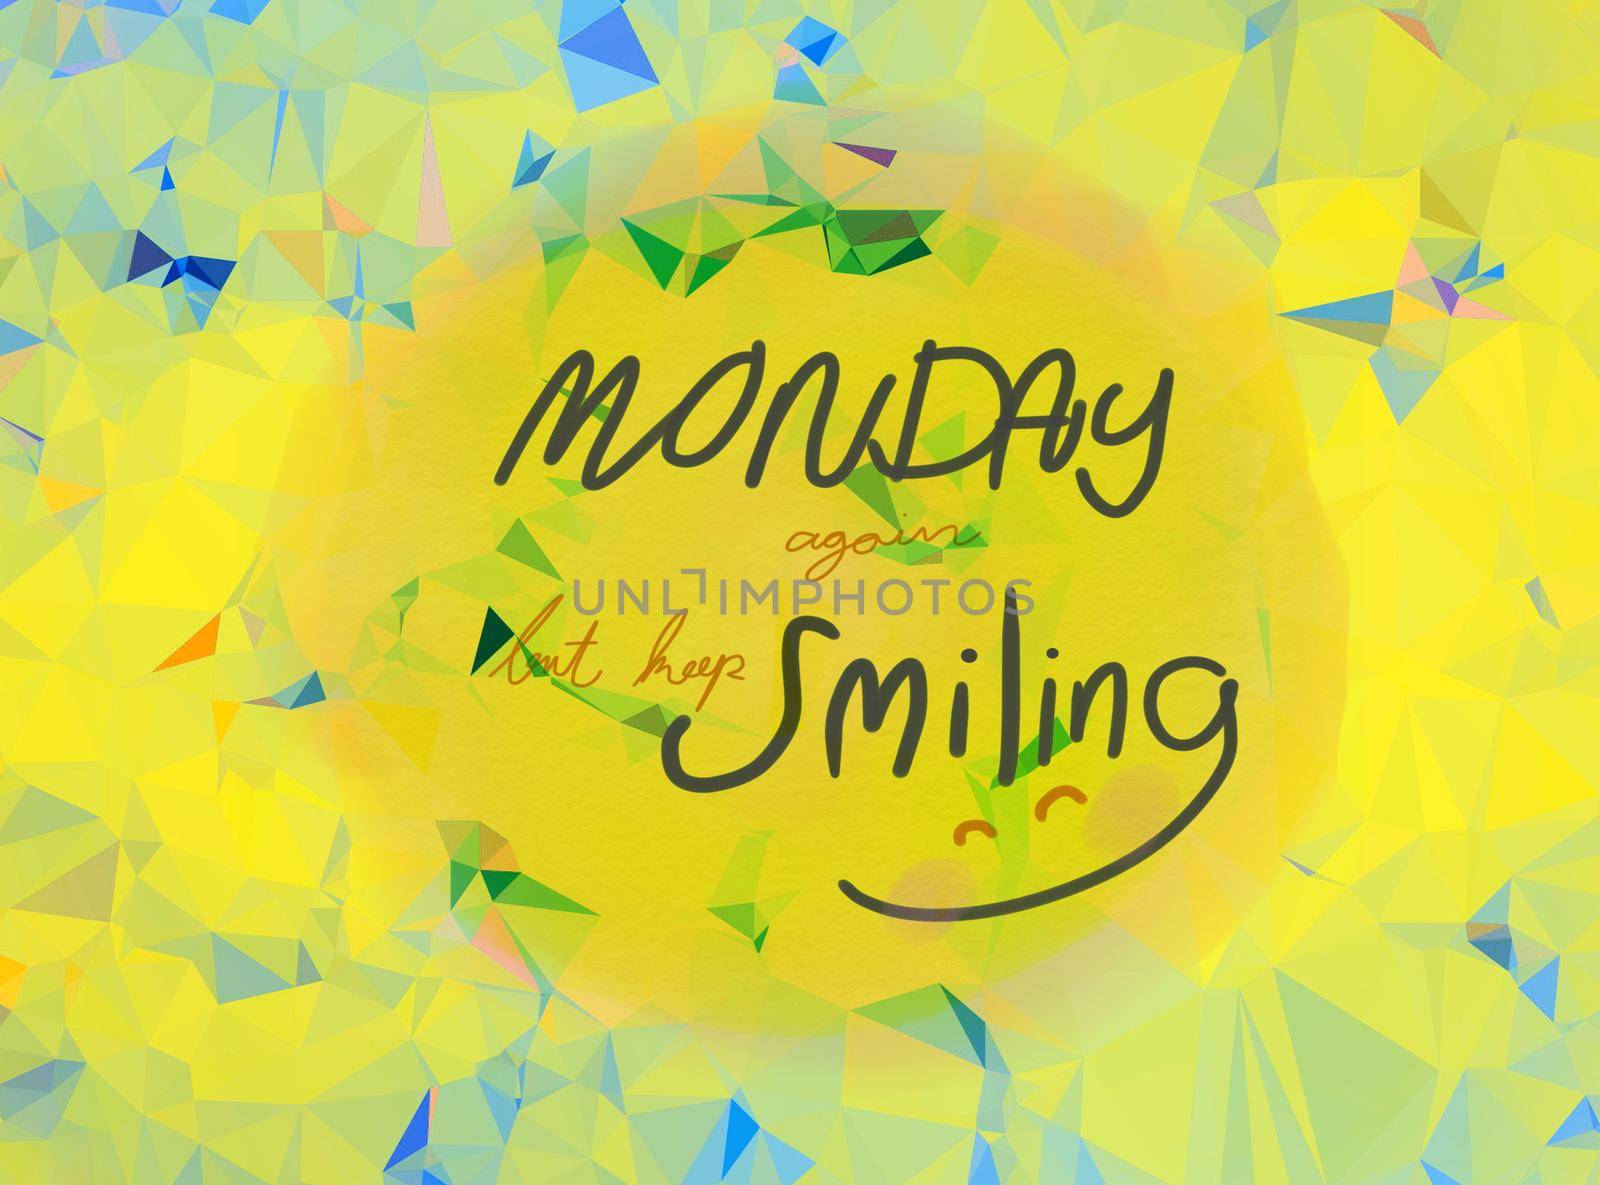 Monday keep smile handwriting on yellow abstract background by Yoopho